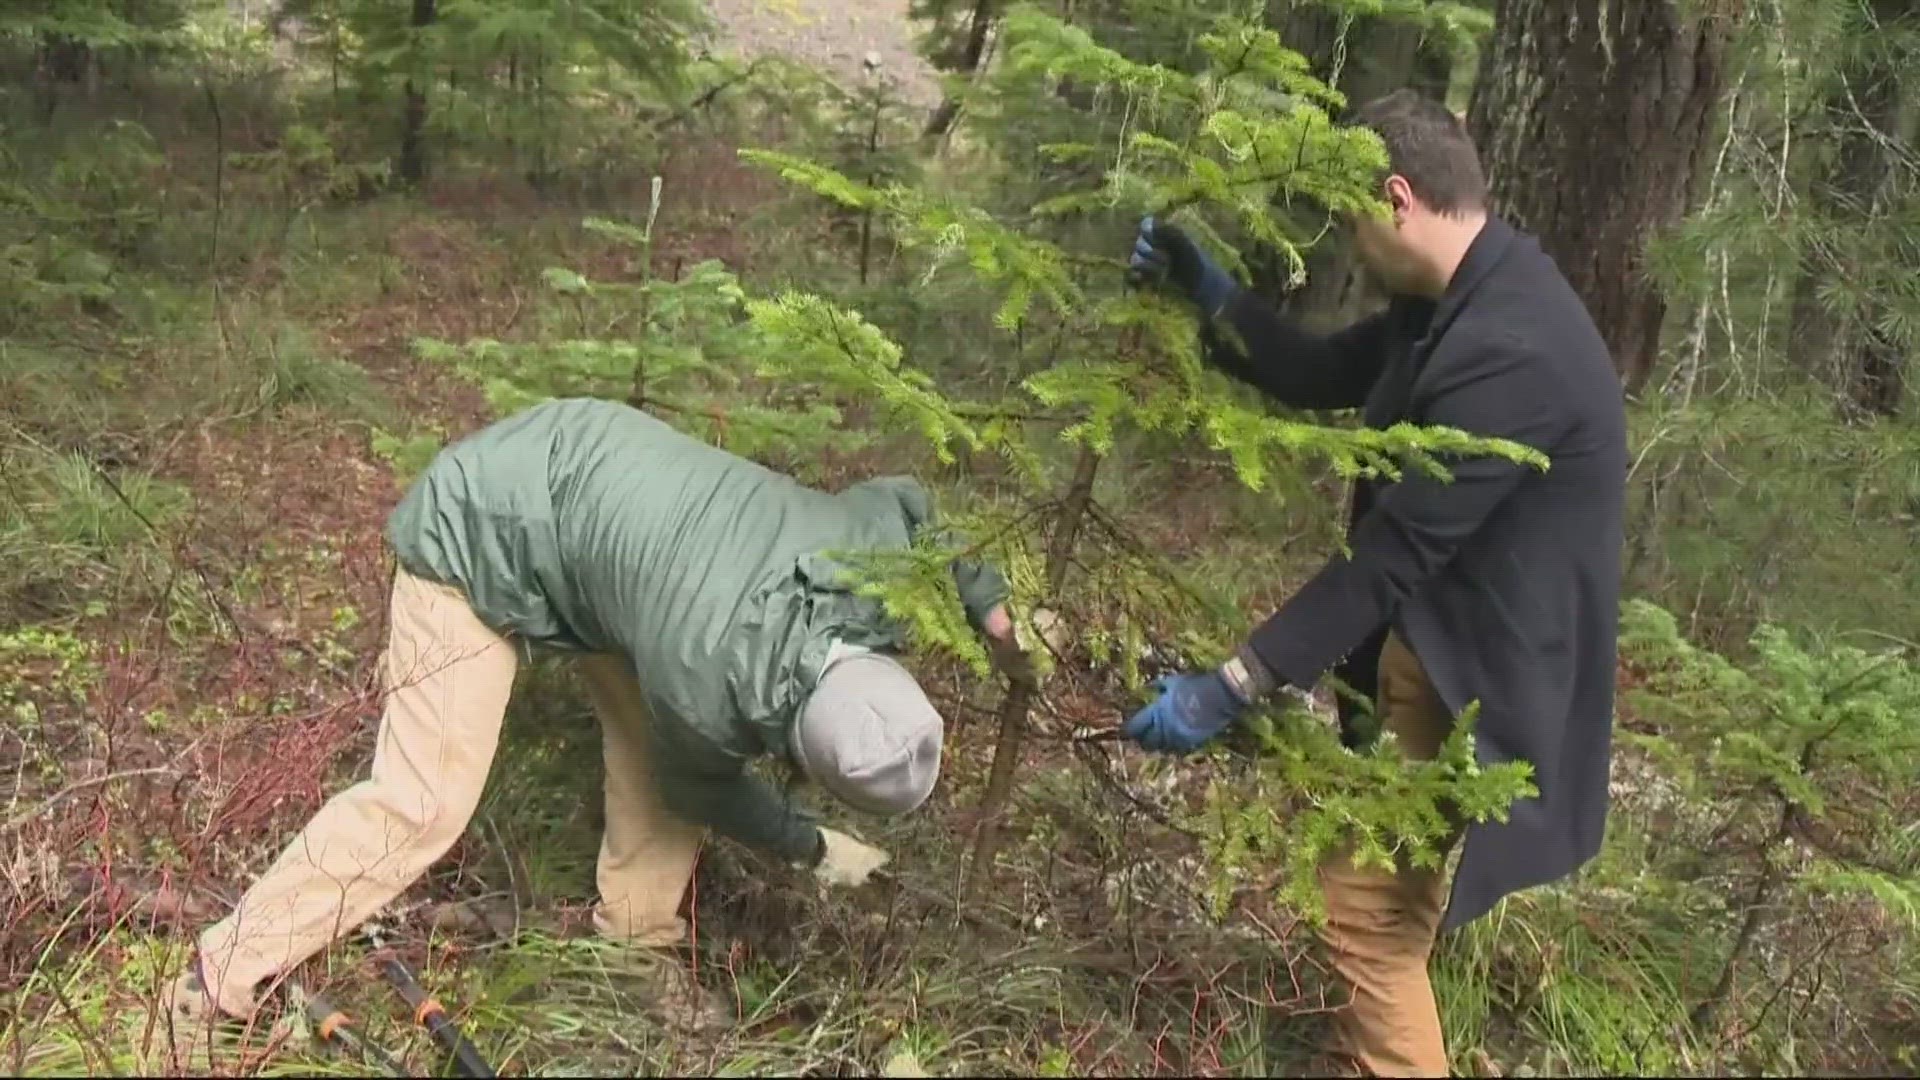 For a mere $5, Oregonians can get a permit to cut down their own Christmas tree in the Mt. Hood National Forest.